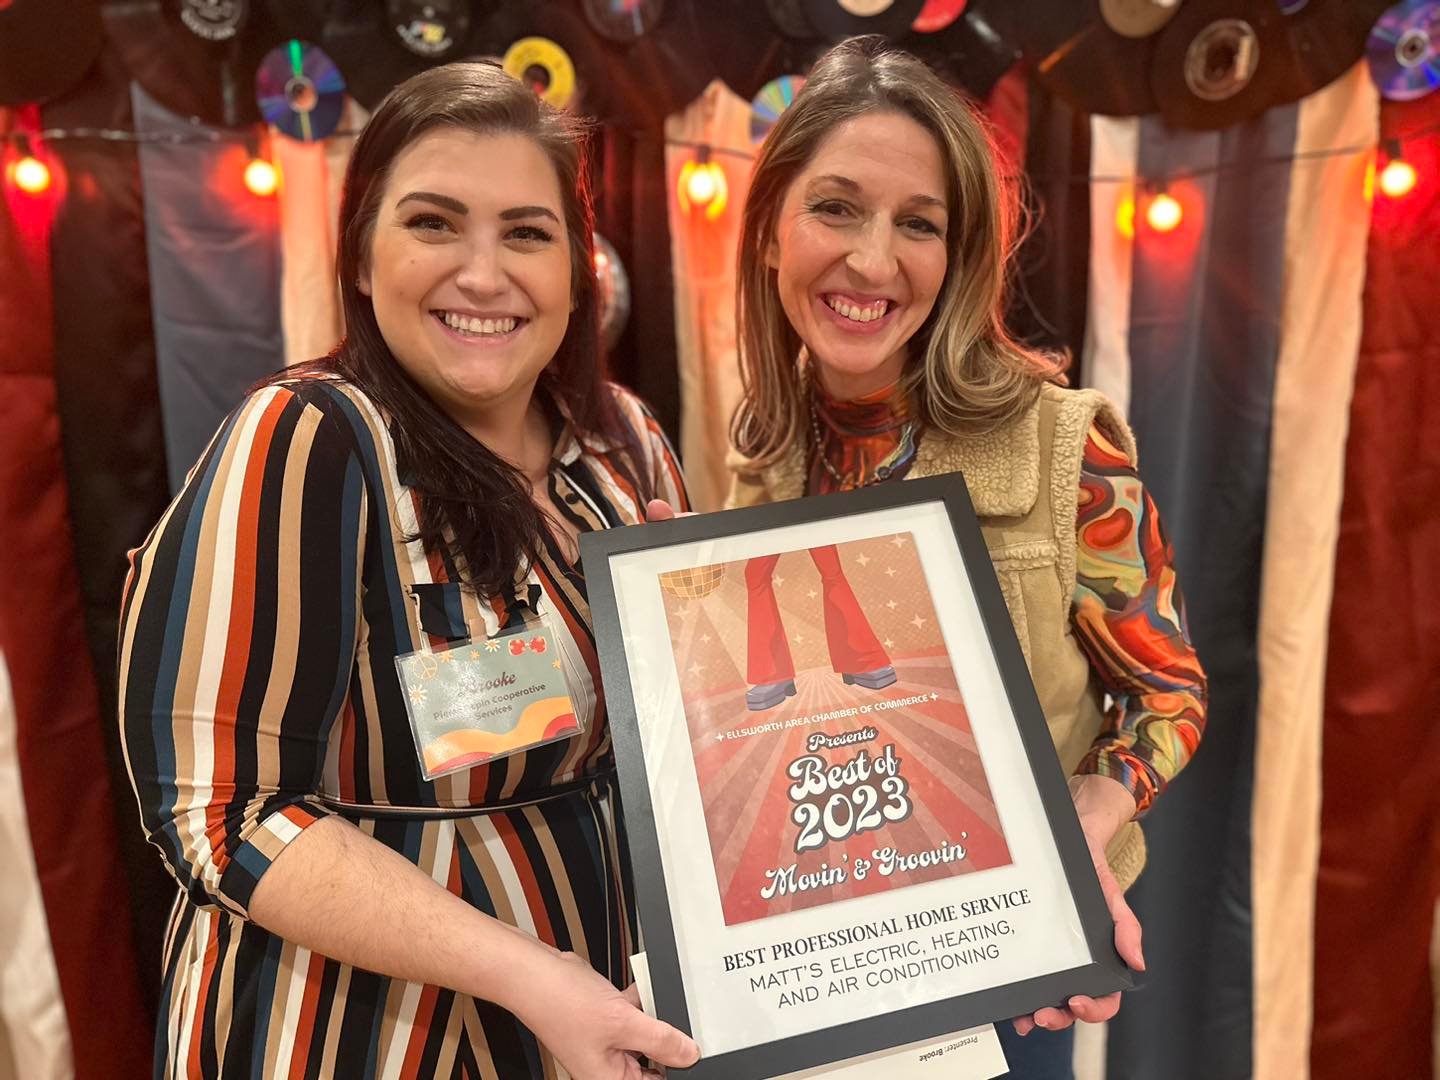 Ellsworth Chamber Board Director Brooke Cupp (left) and Becky Beissel, Chamber executive committee team member, accepted the Best Professional Home Service award on behalf of Matt’s Electric, Heating & Air Conditioning Feb. 20.